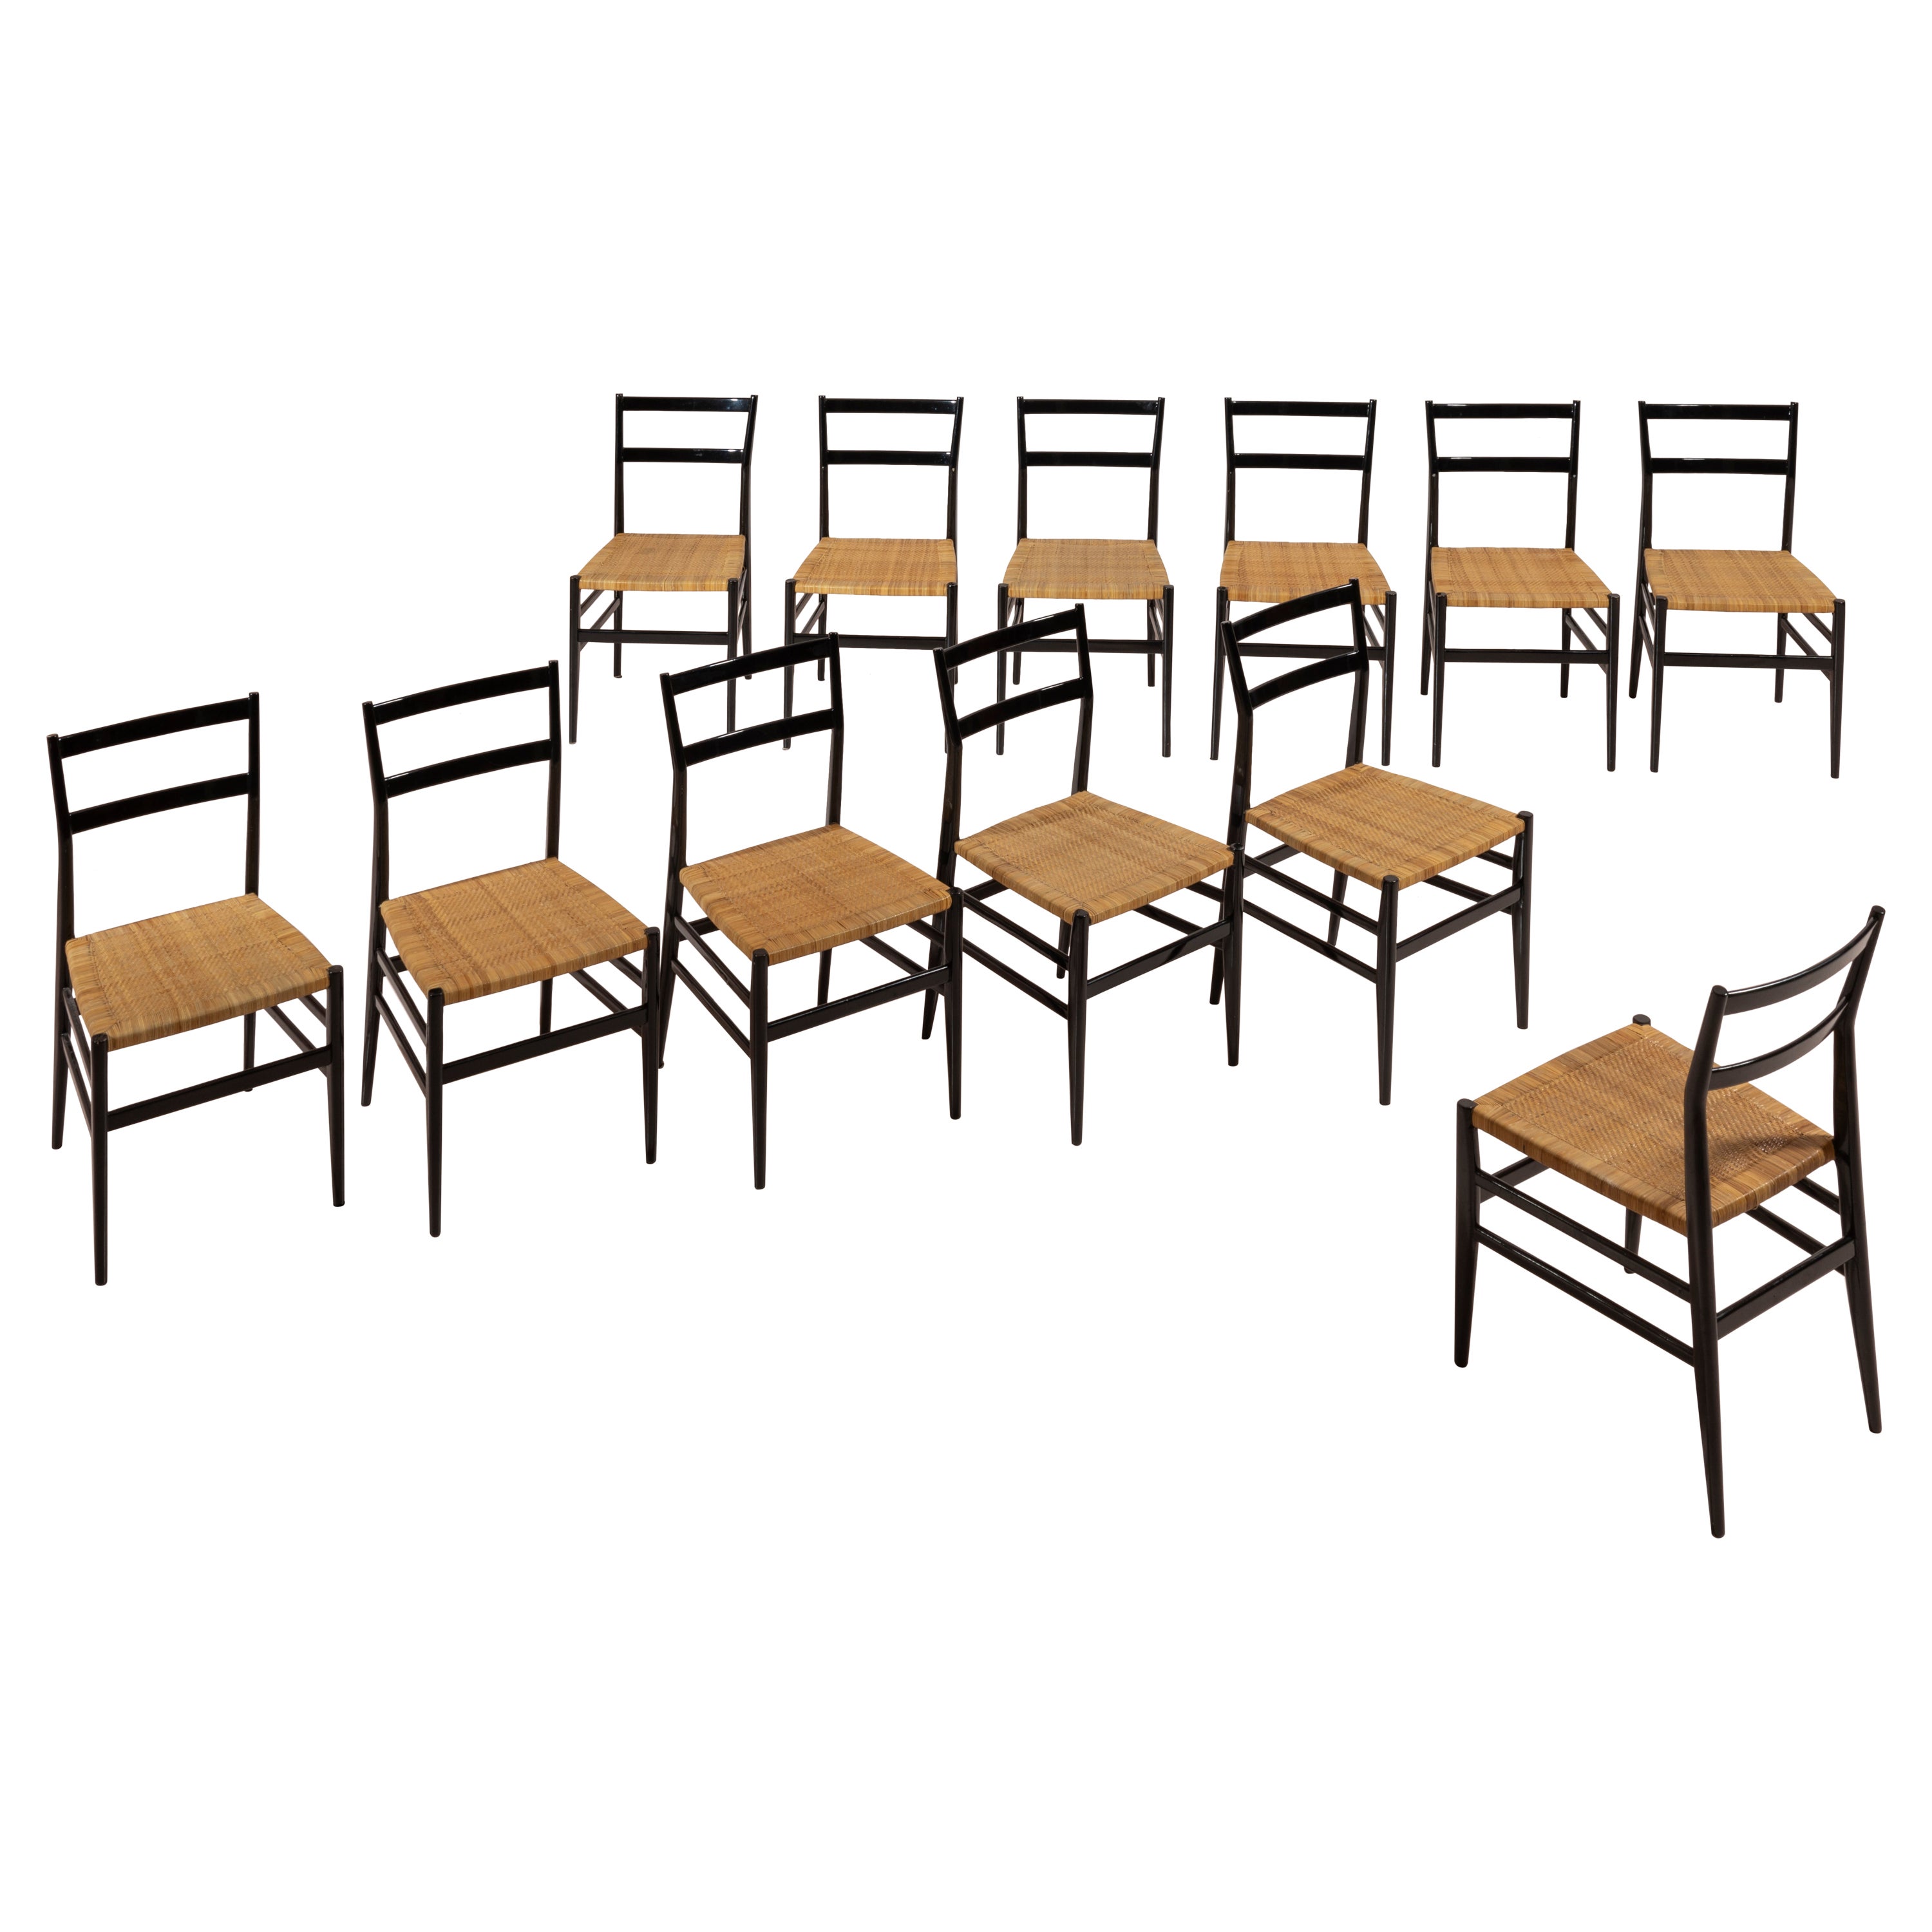 Gio Ponti set of twelve Leggera chairs with hand-woven rattan cane, Italy 1951 For Sale